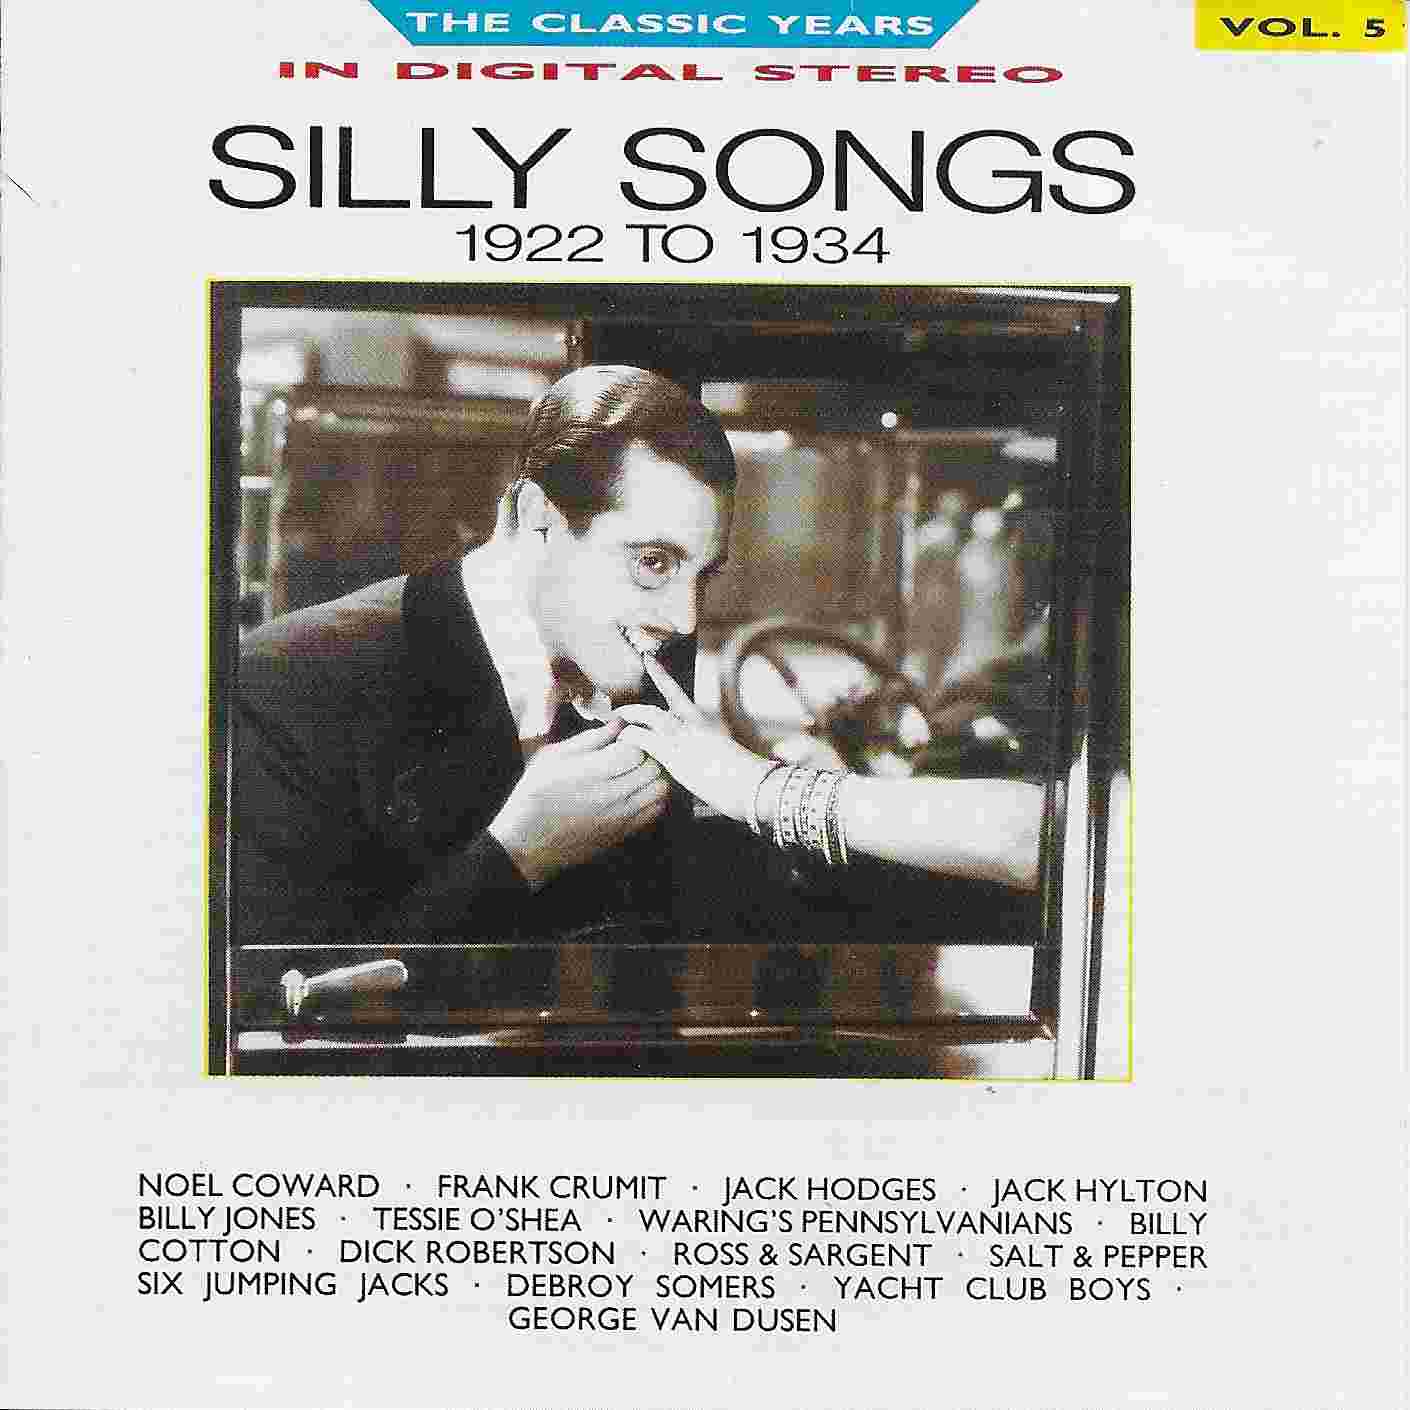 Picture of BBCCD652 Classic years - Volume 5, Silly songs by artist Various from the BBC cds - Records and Tapes library